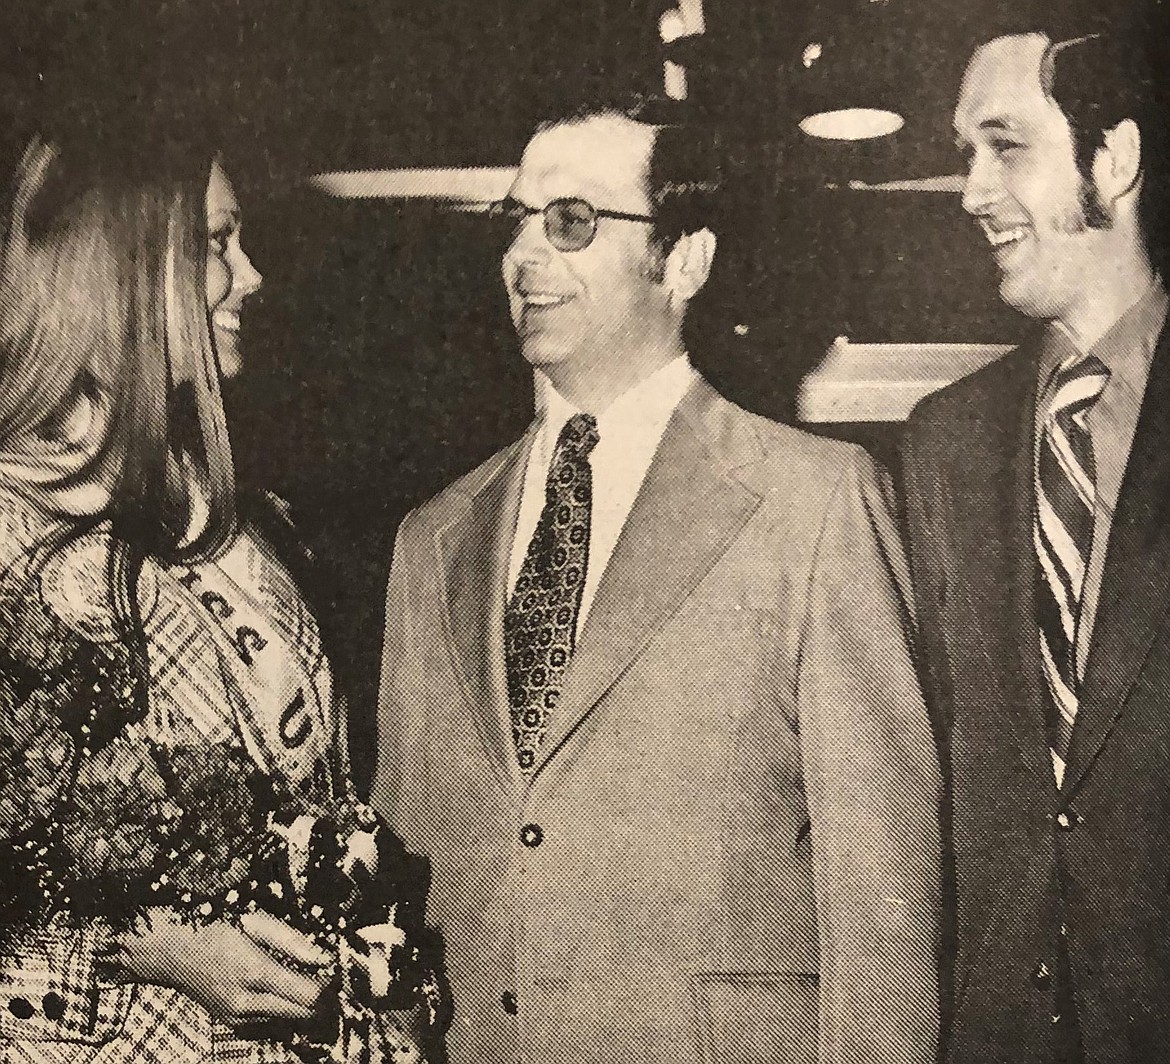 Miss USA Michele McDonald with J.C. Penney manager Dan Unger, center, and local Jaycees representative and later mayor, Al Hassell (March 1972).